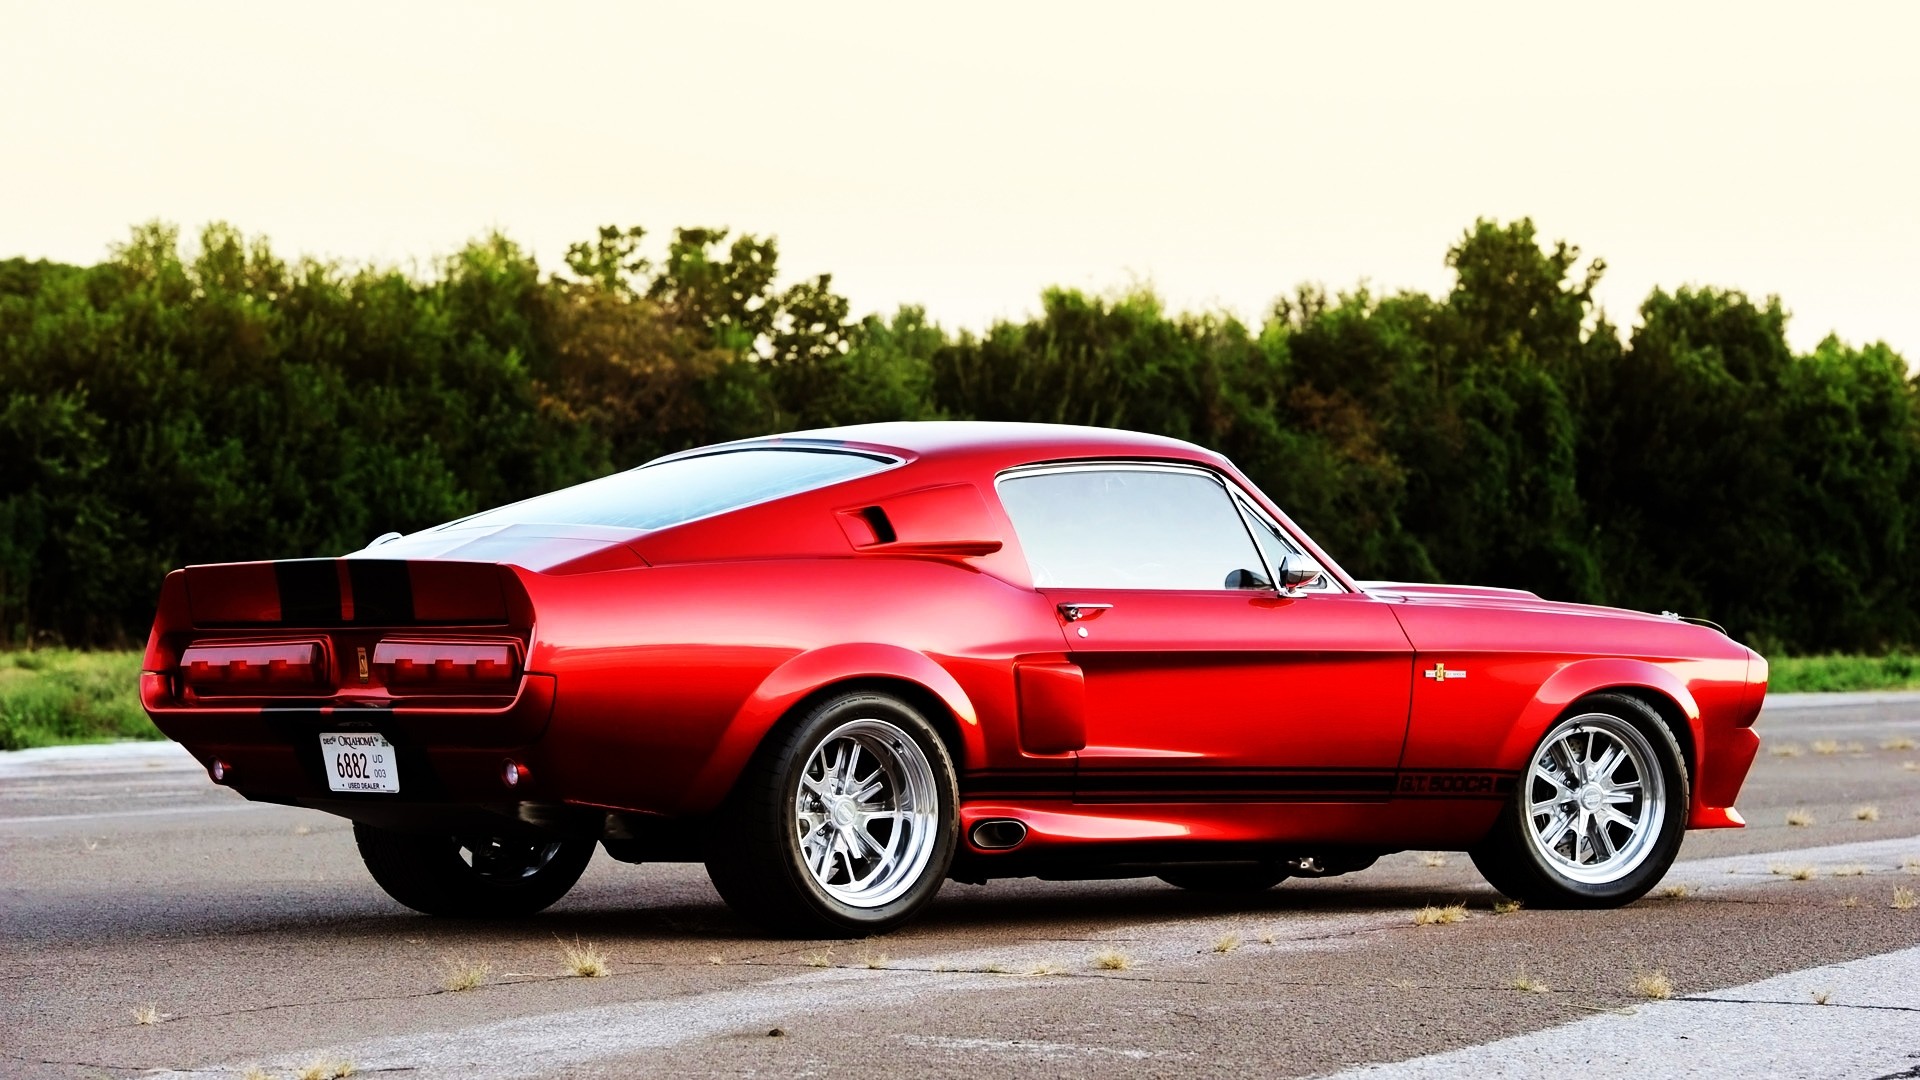 Cool Muscle Car Backgrounds wallpaper wallpaper hd background 1920x1080